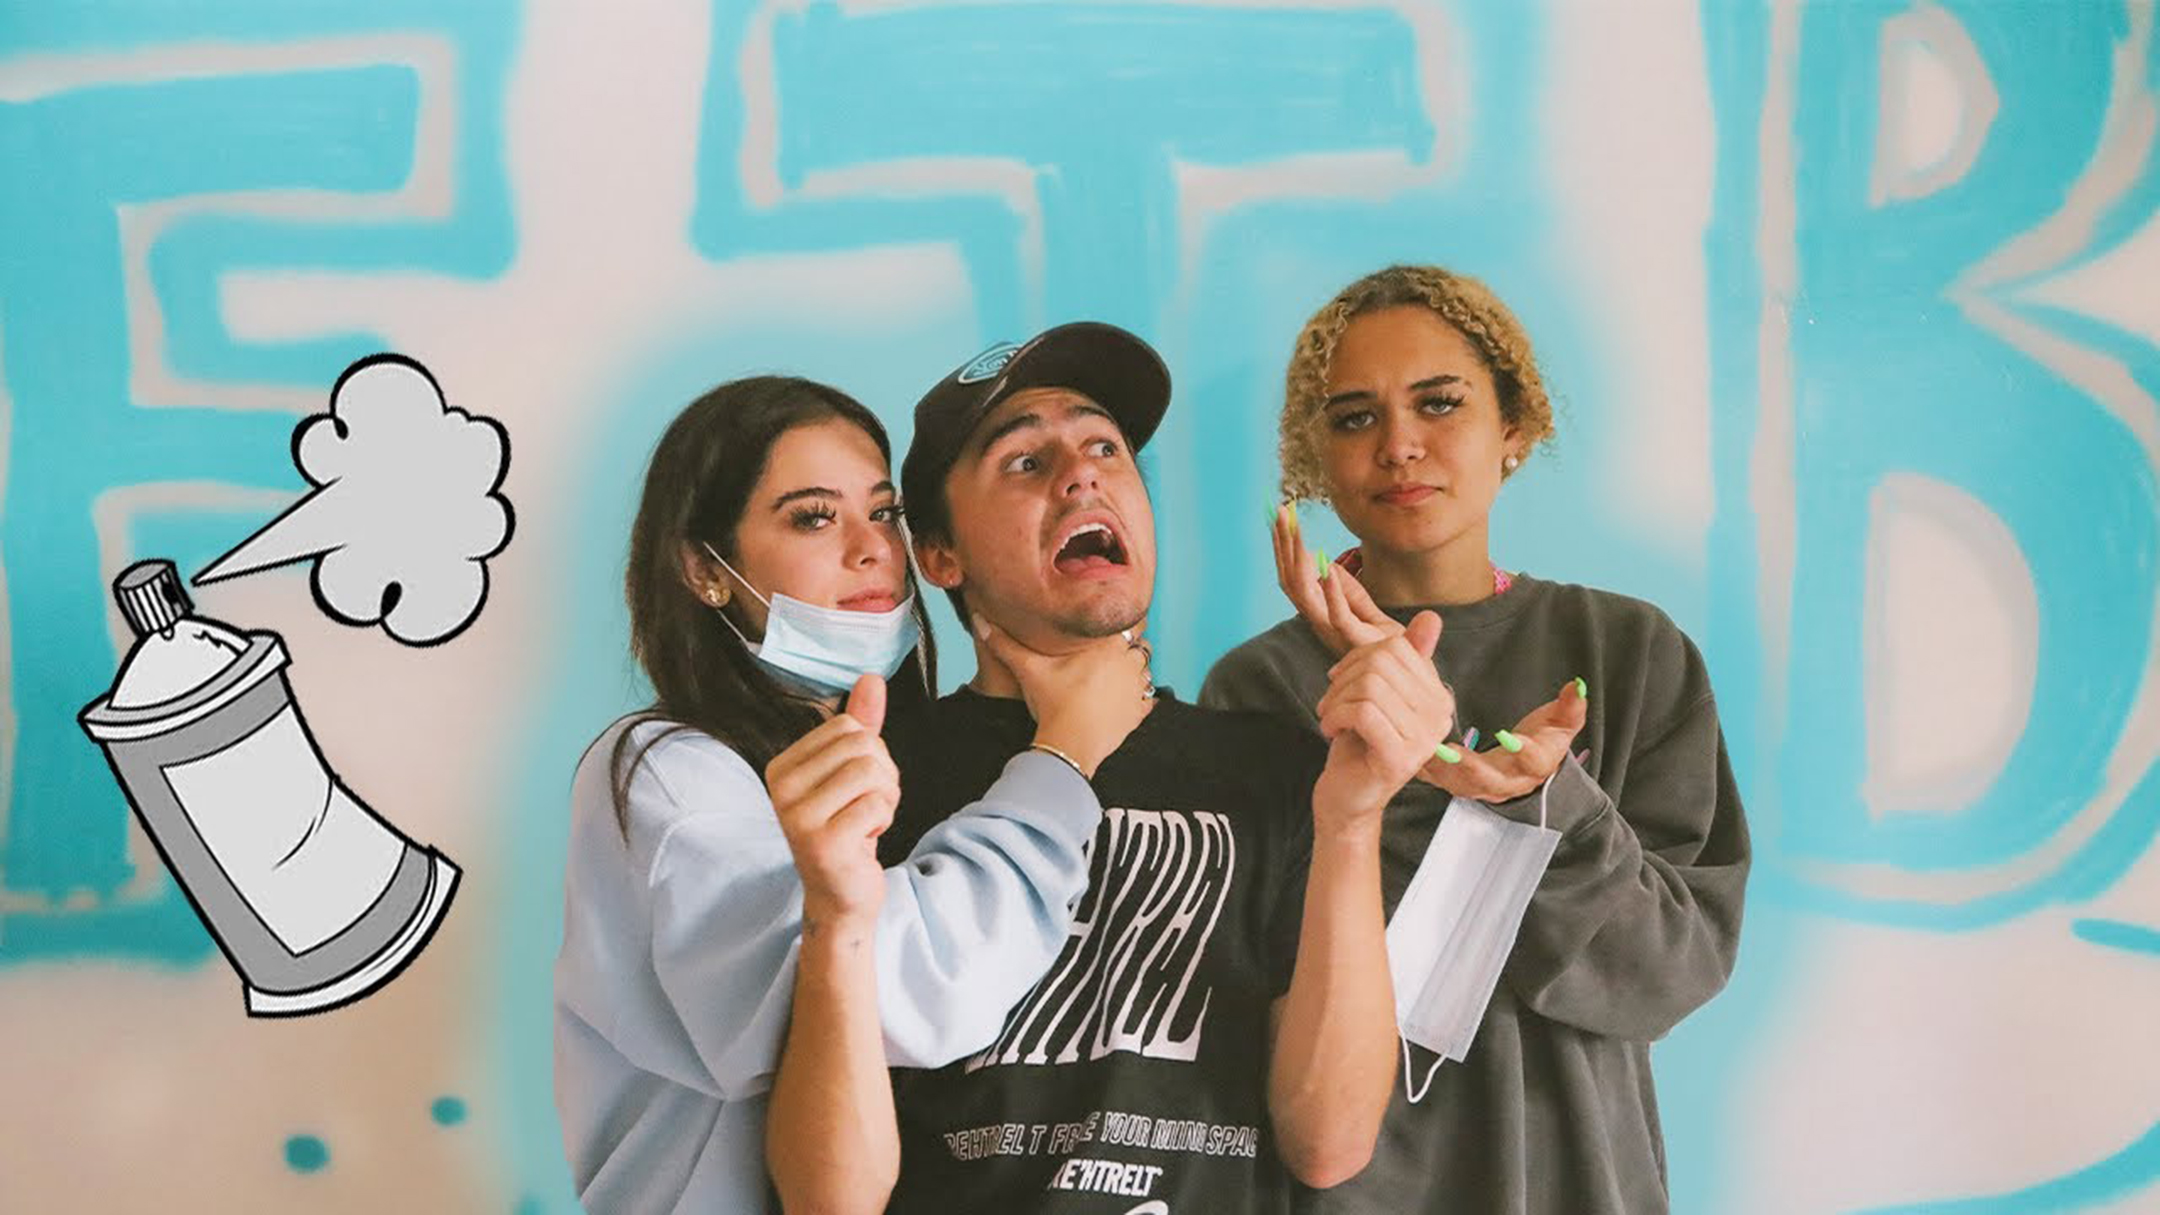 Three young people, two women with a man in between, make faces while standing in front of a white wall where the letters FTB have been spray painted in sky blue